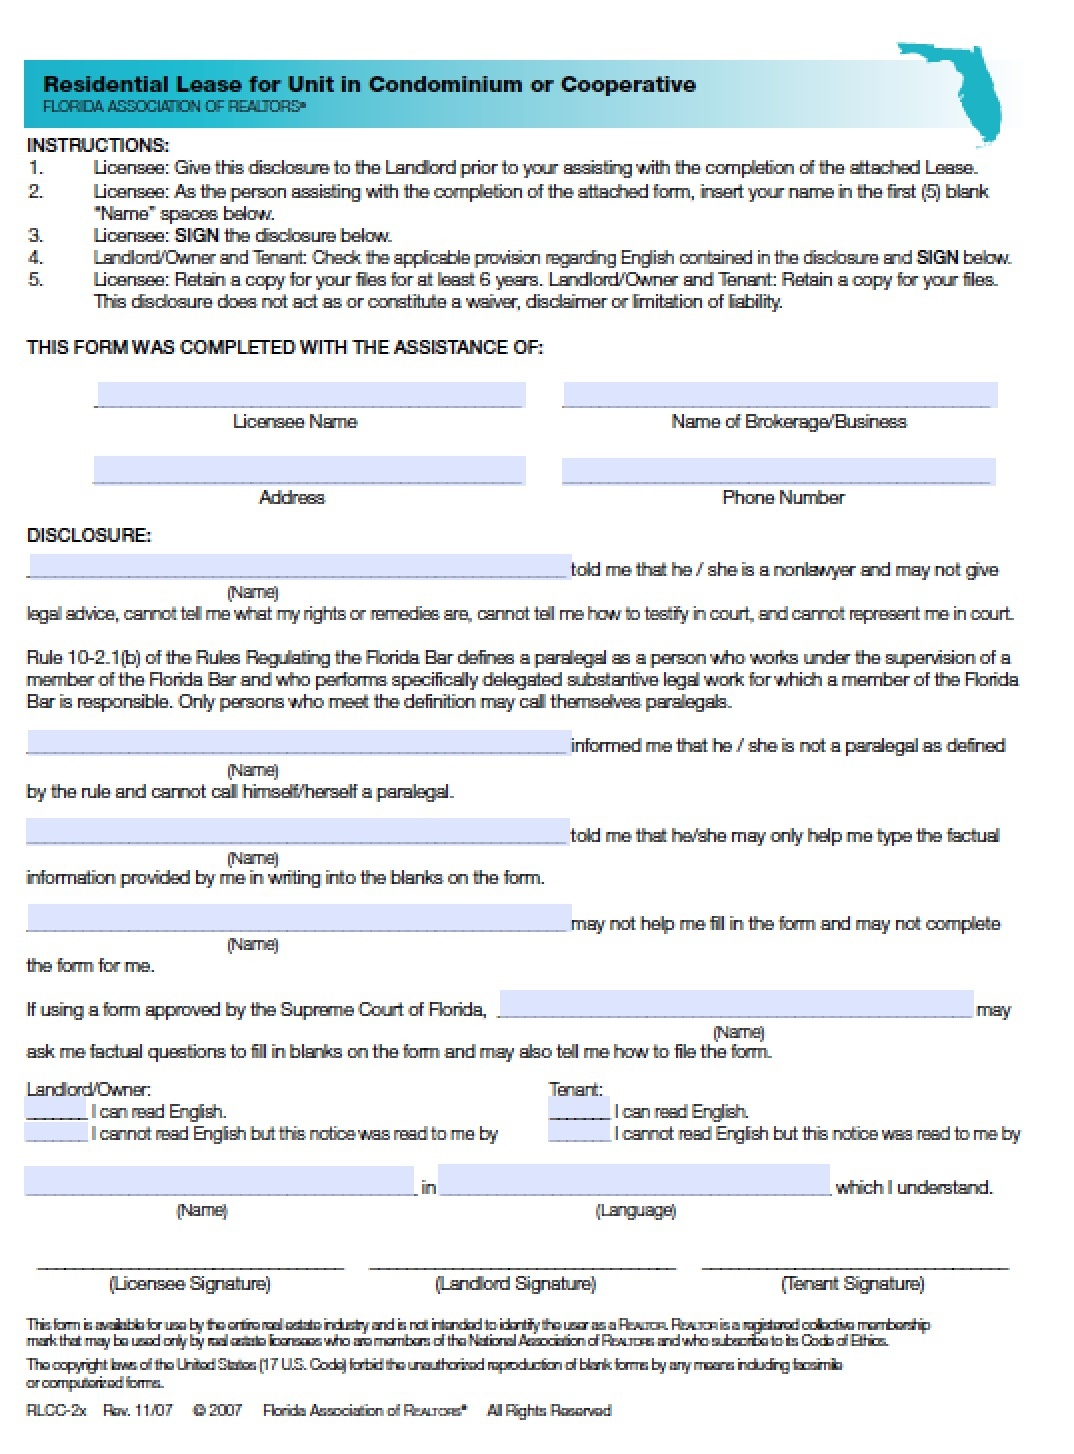 Free Florida Residential Lease Agreement | Pdf | Word (.doc) - Free Printable Florida Residential Lease Agreement